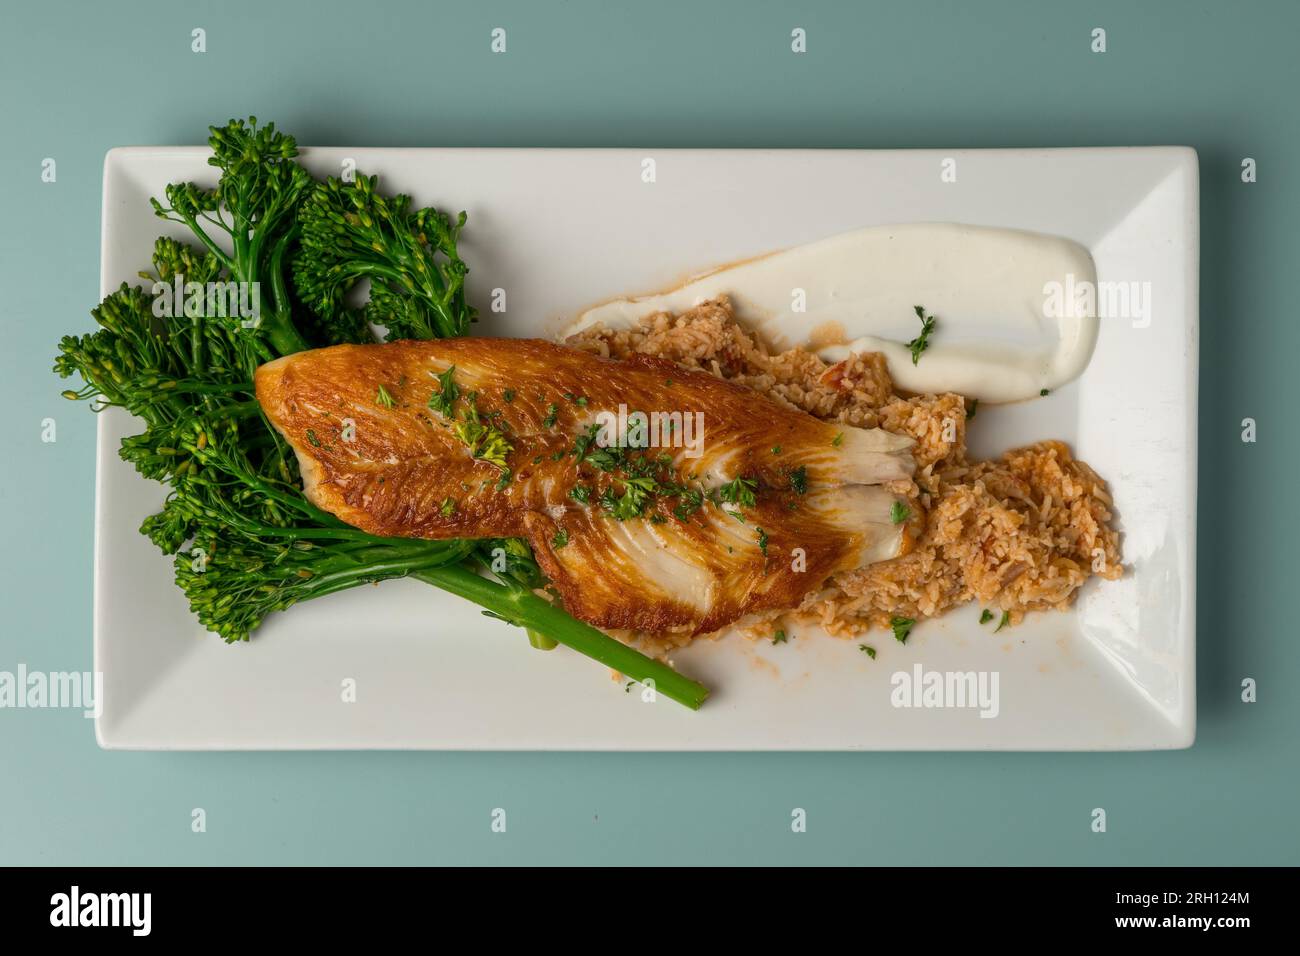 Fried fish and broccoli Stock Photo